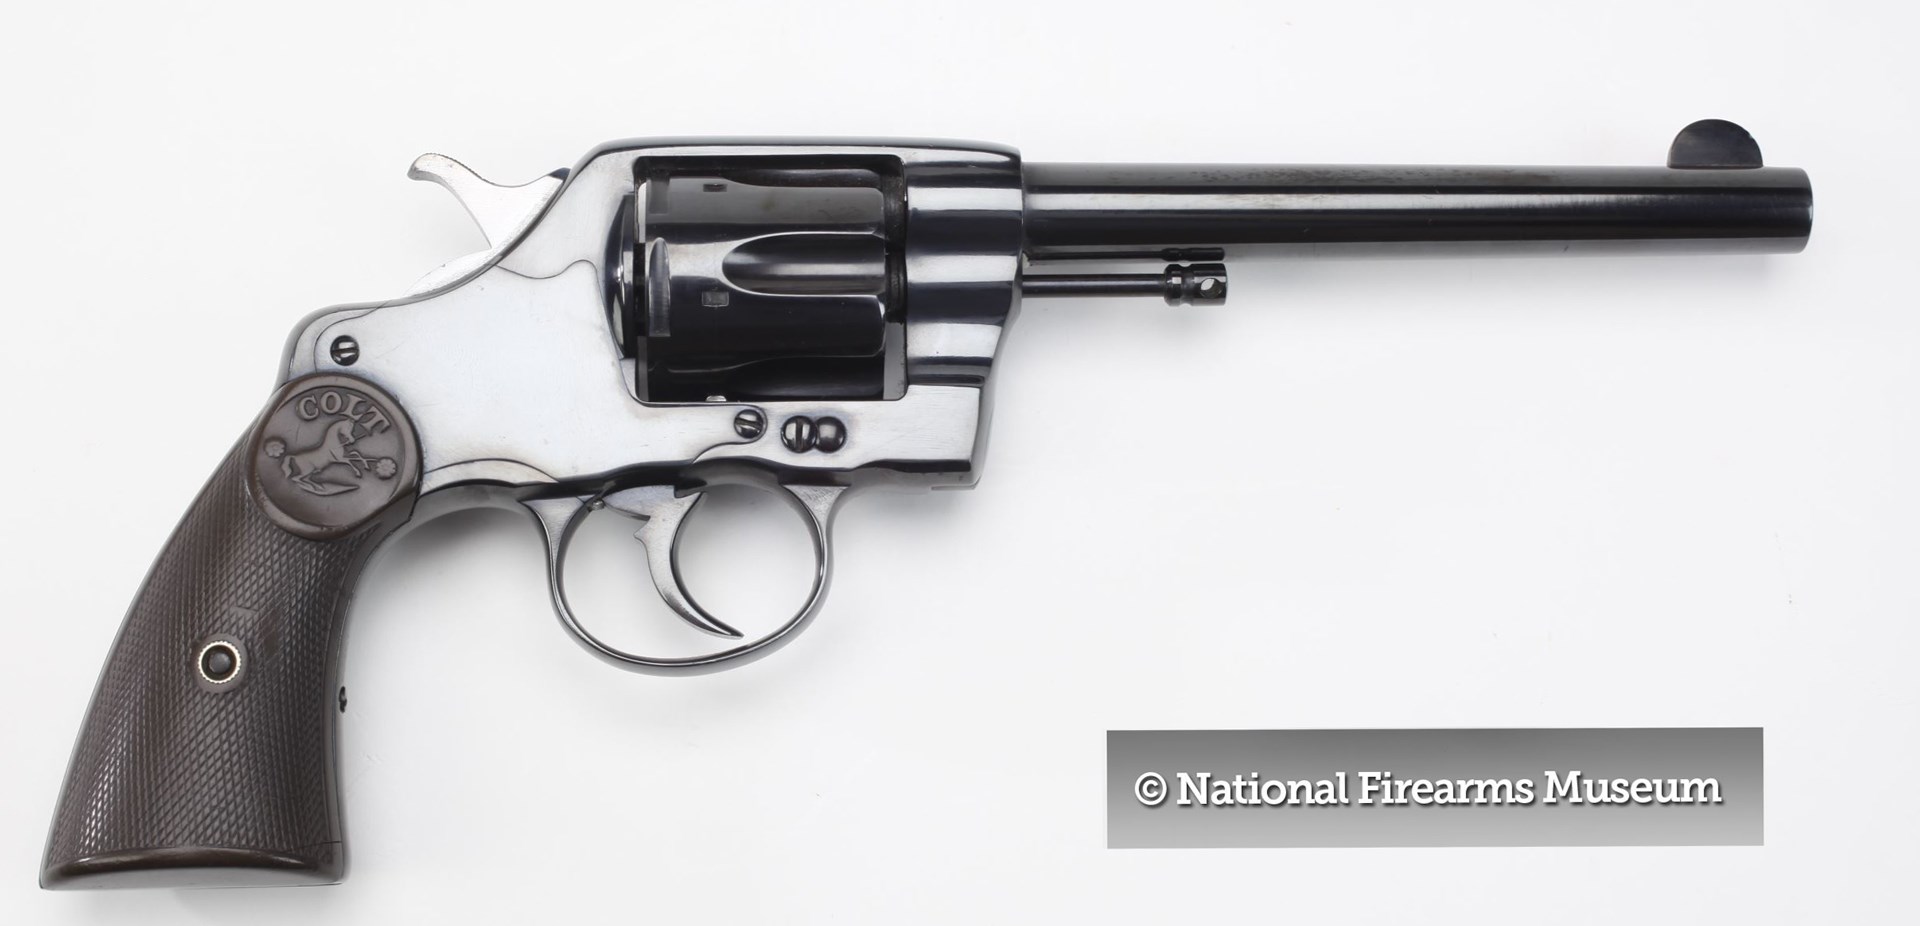 Right side of Colt M1892 revolver copyright NATIONAL FIREARMS MUSEUM